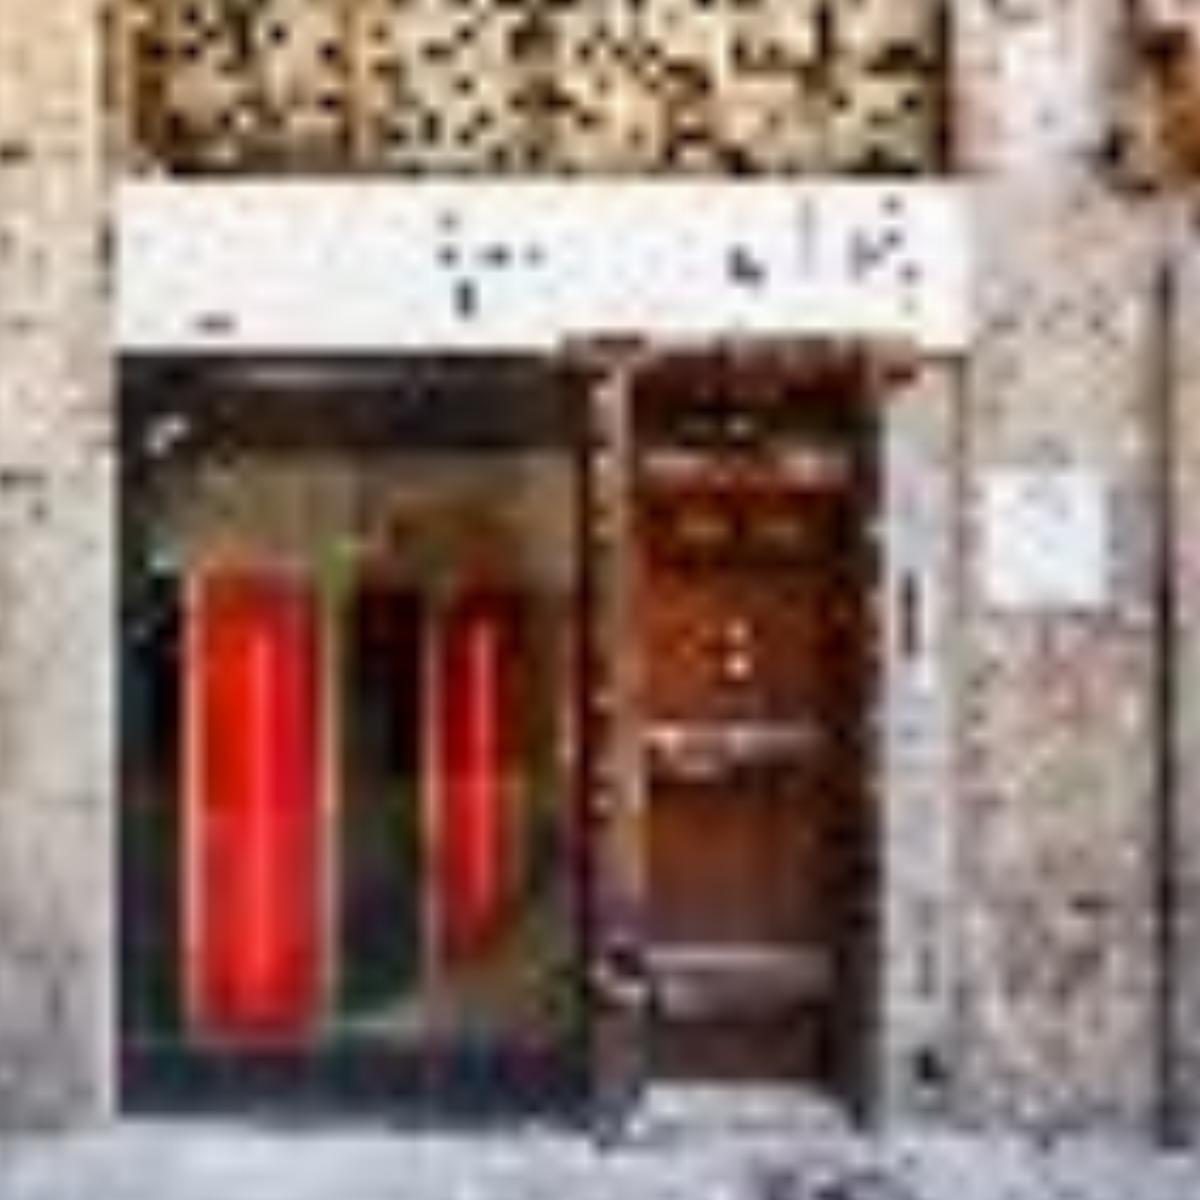 AinB Picasso-Corders Apartments Hotel Barcelona Spain